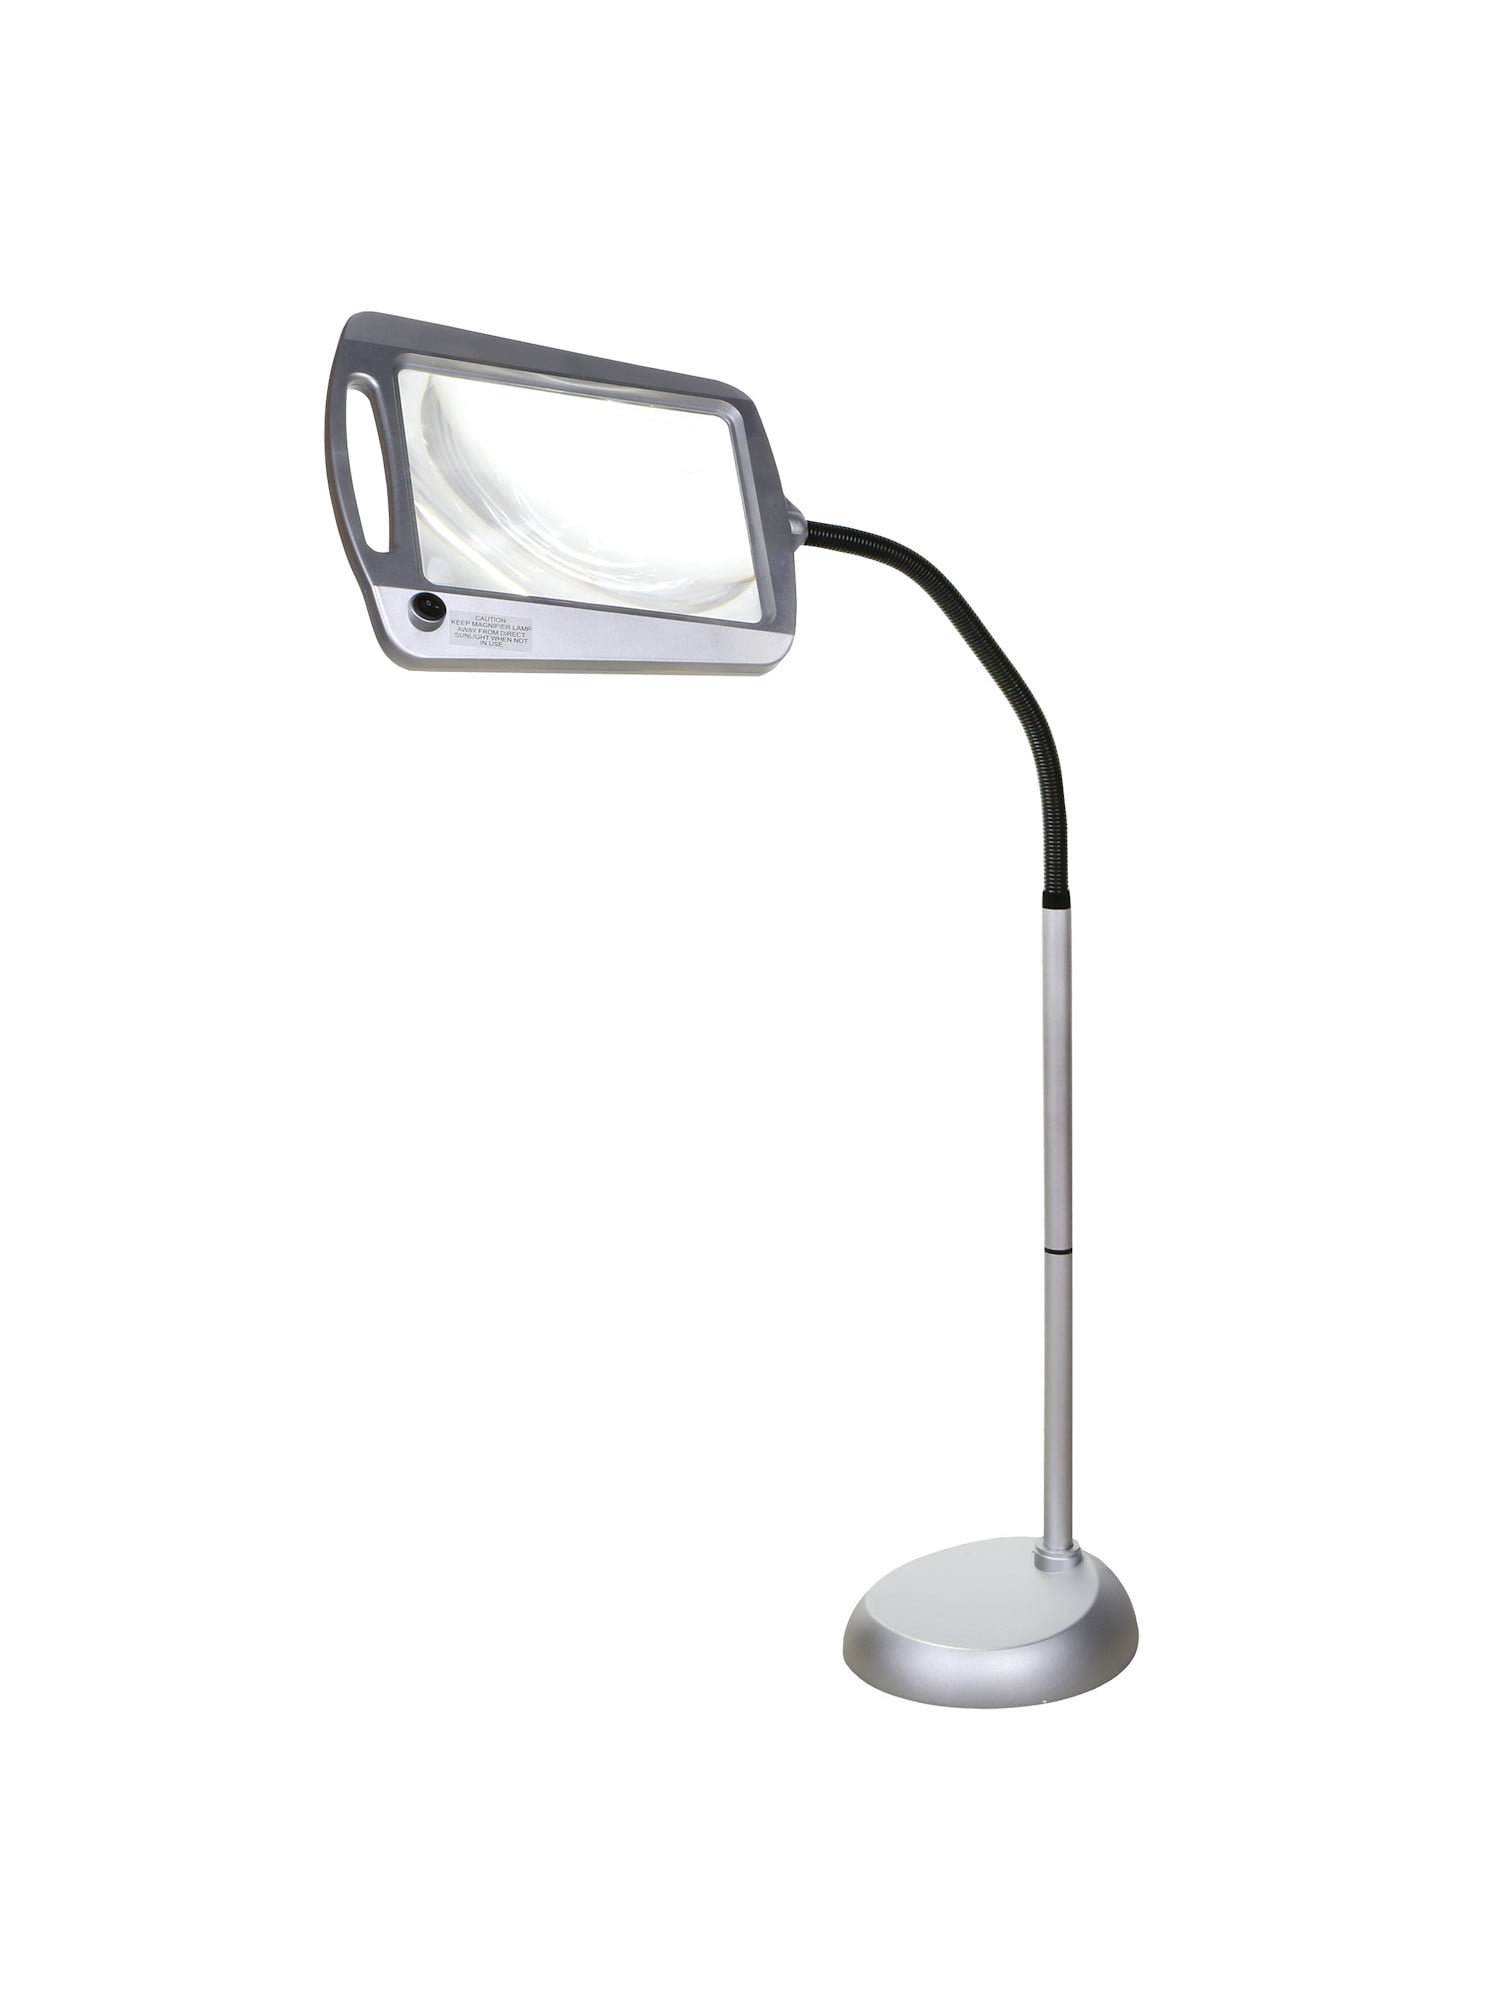 Silver New daylight24 402039-05 Natural Daylight Full Page Magnifier Floor Lamp